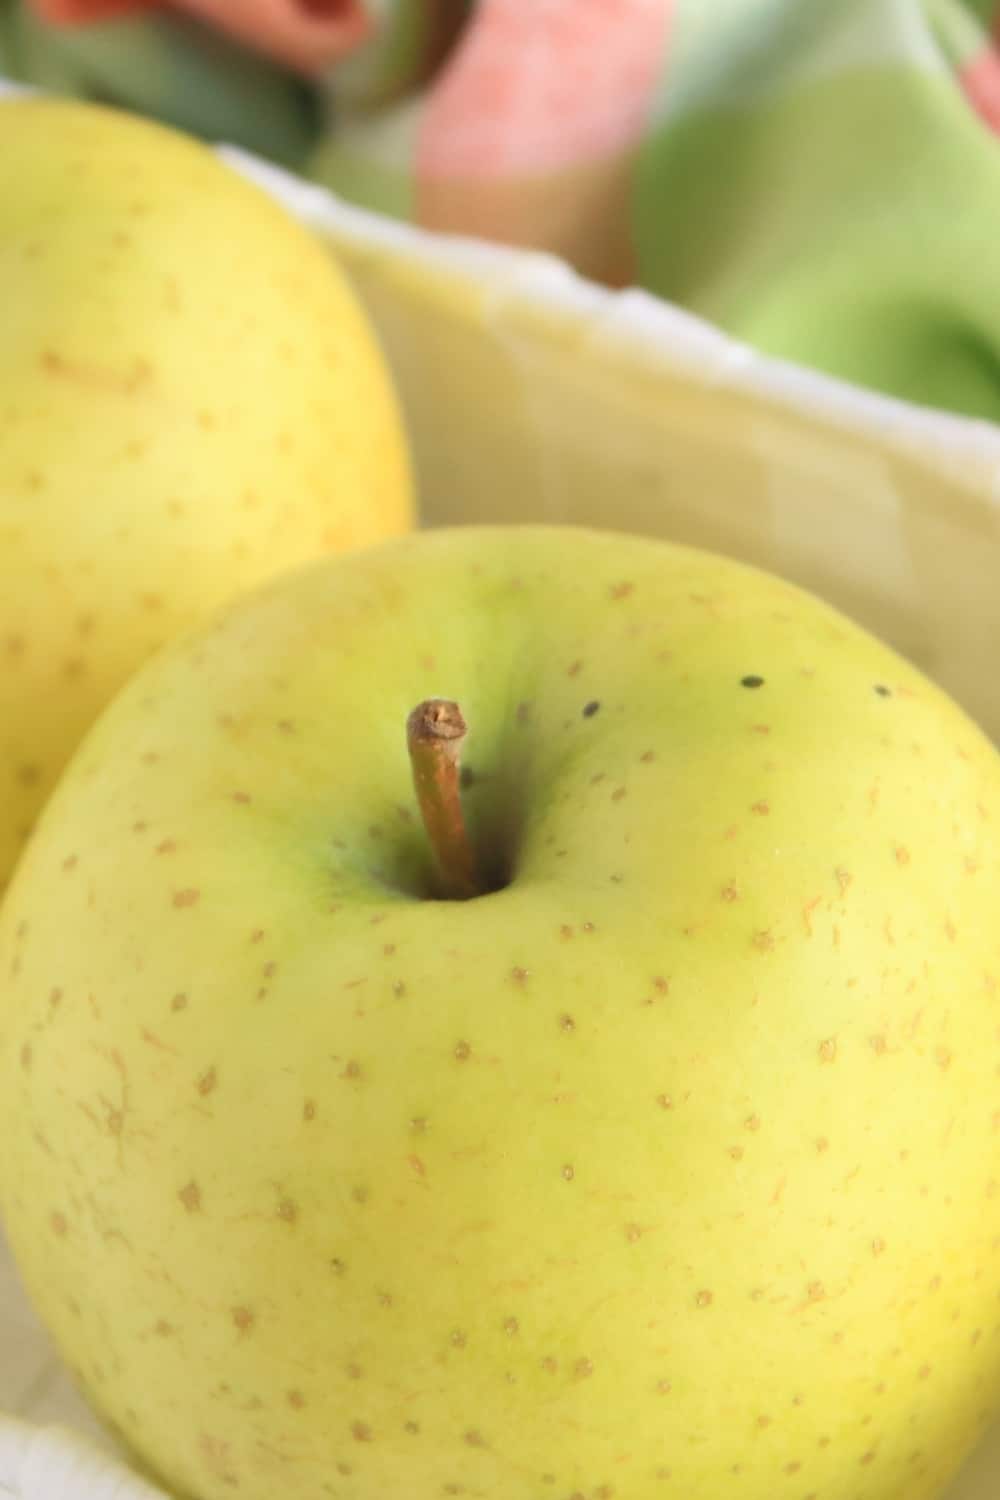 Japanese yellow and pale green apples Orin